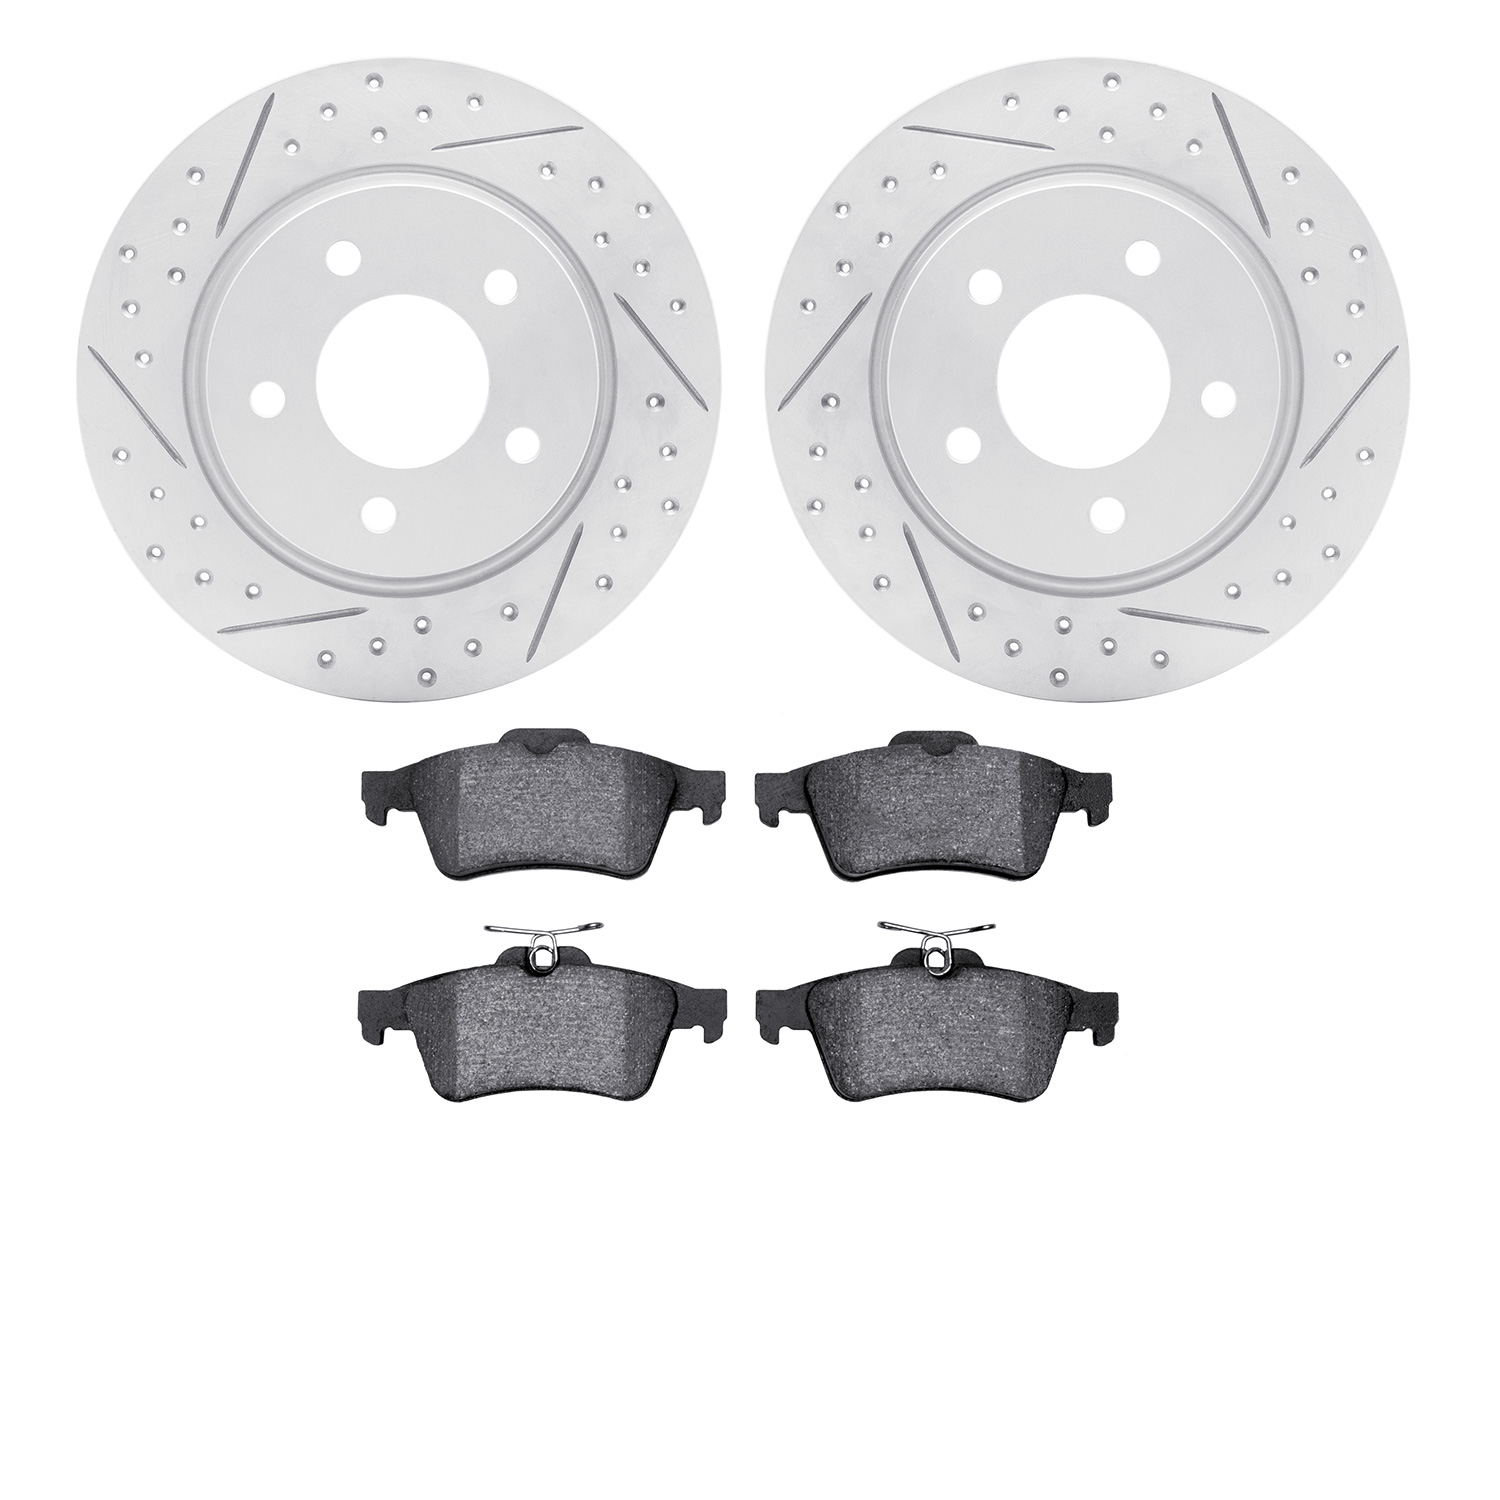 2502-80014 Geoperformance Drilled/Slotted Rotors w/5000 Advanced Brake Pads Kit, 2004-2013 Ford/Lincoln/Mercury/Mazda, Position: